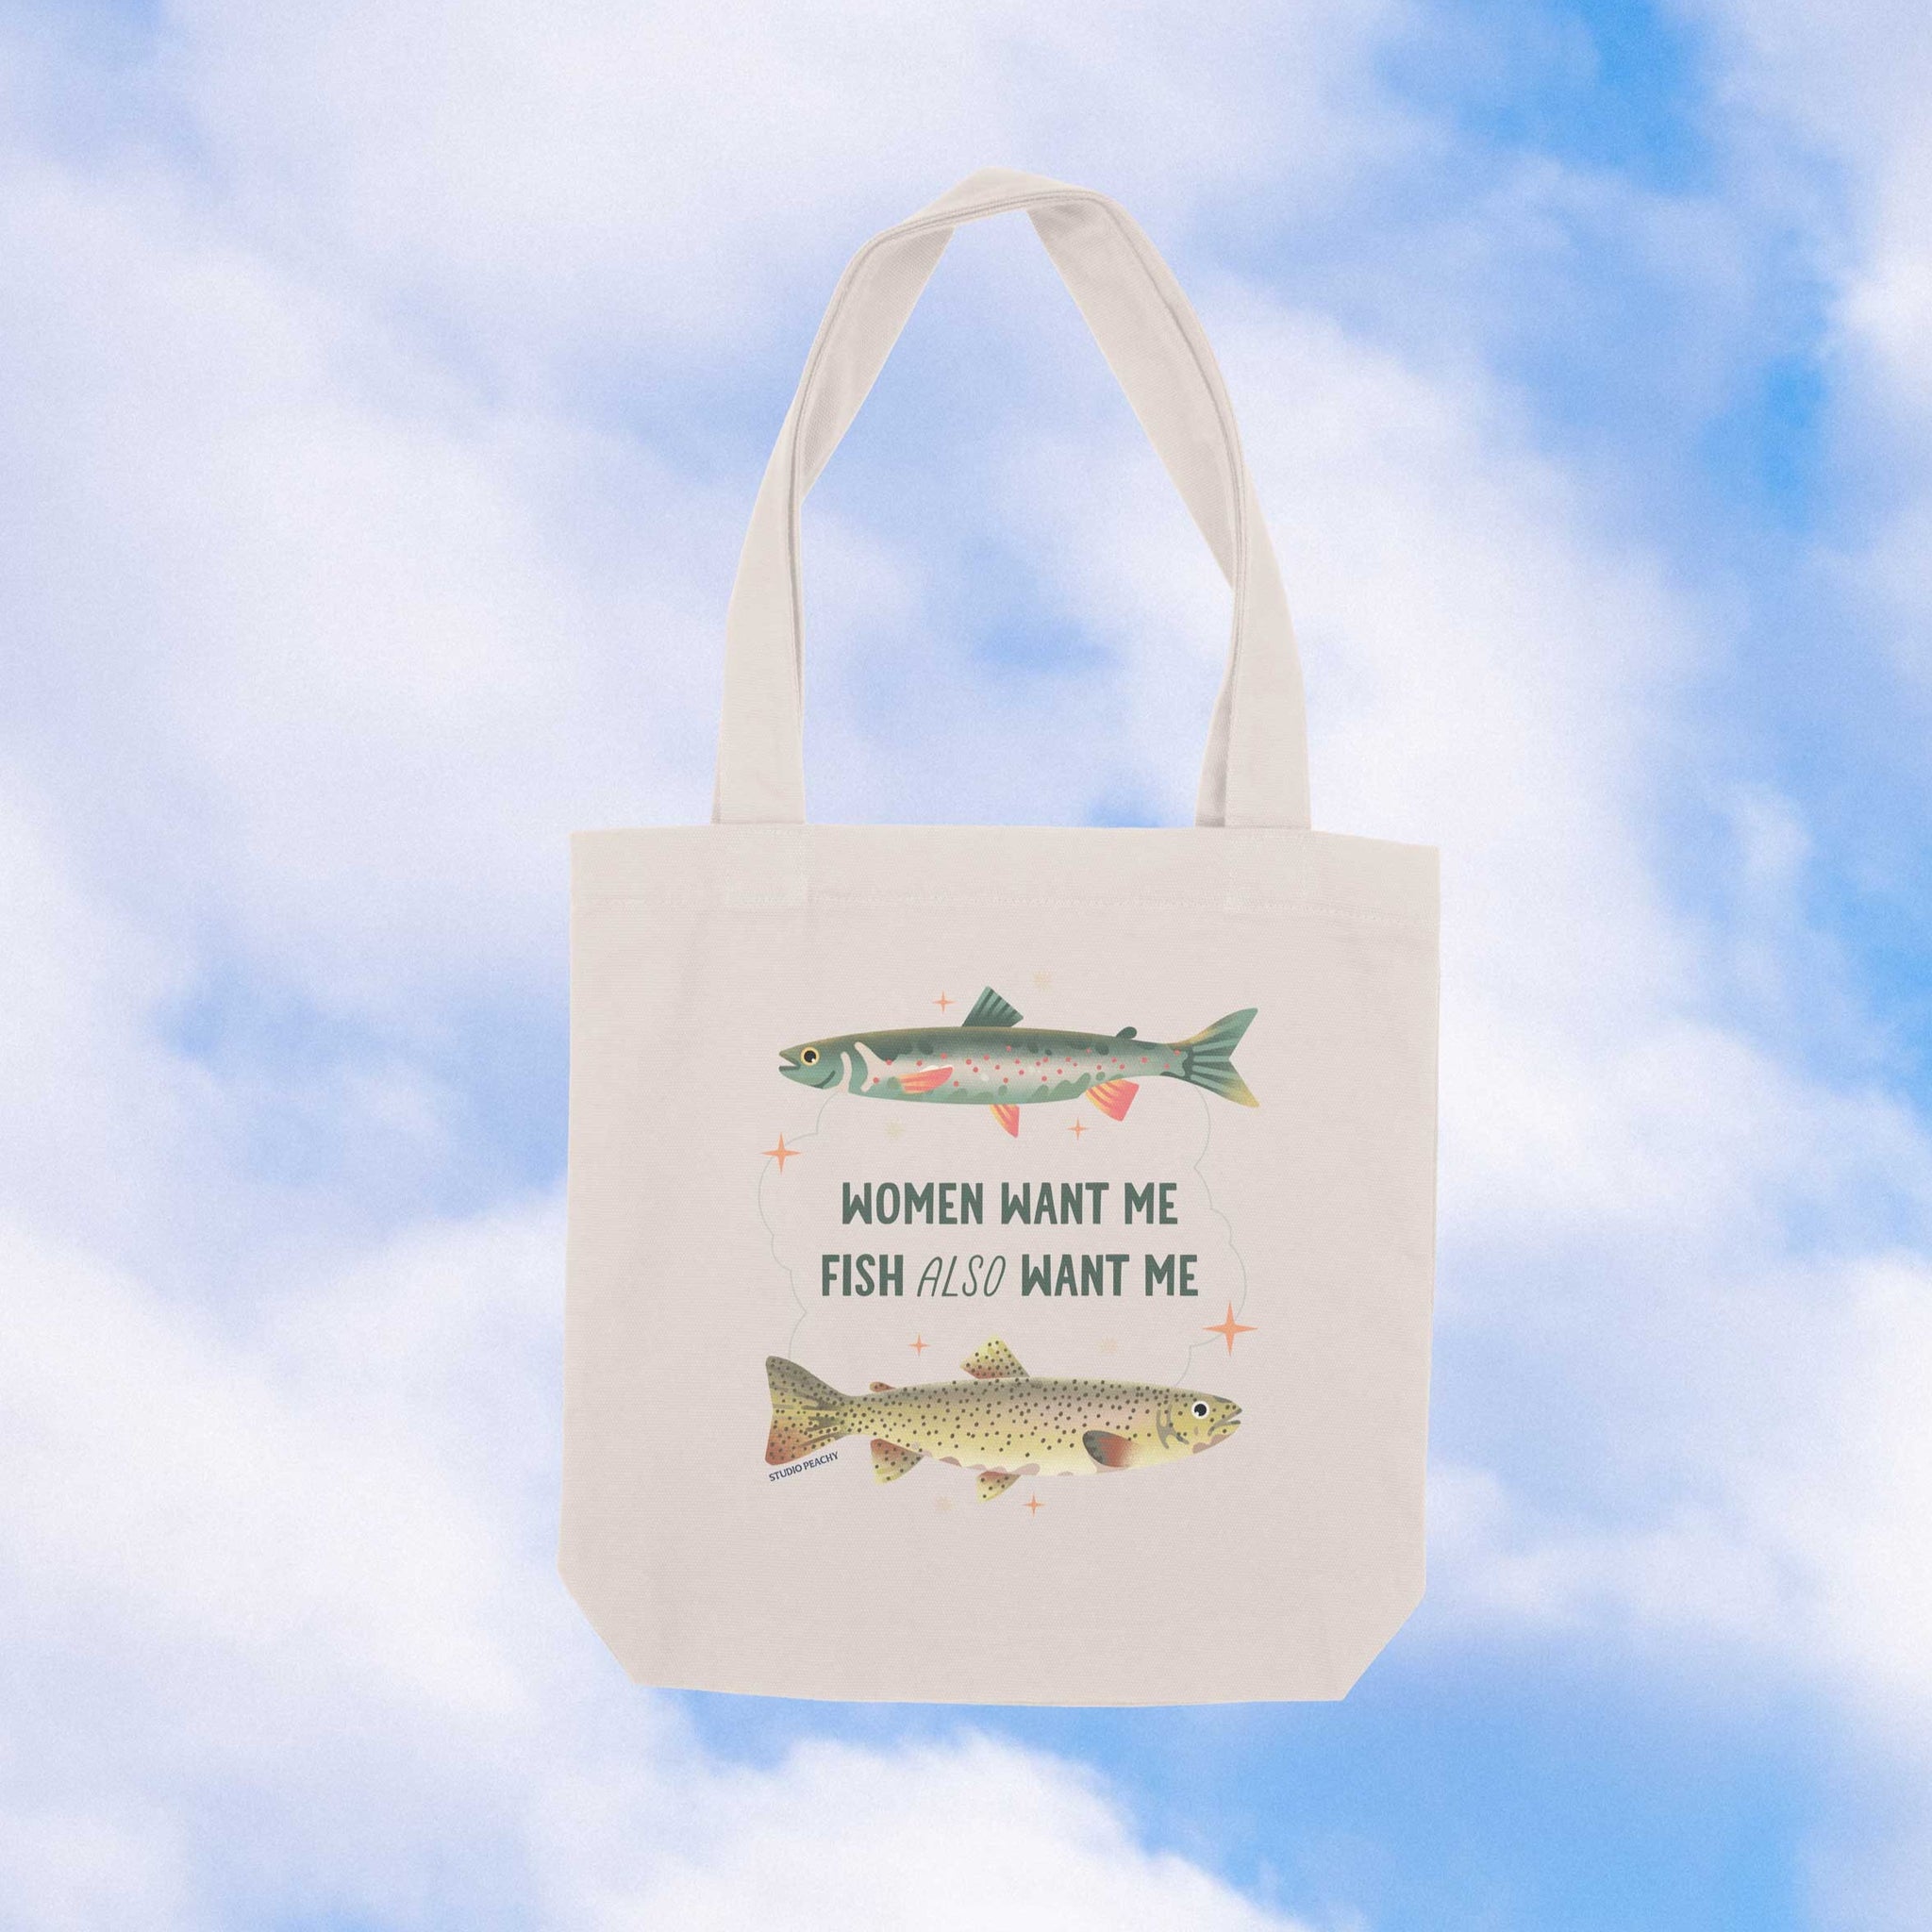 Women want me tote